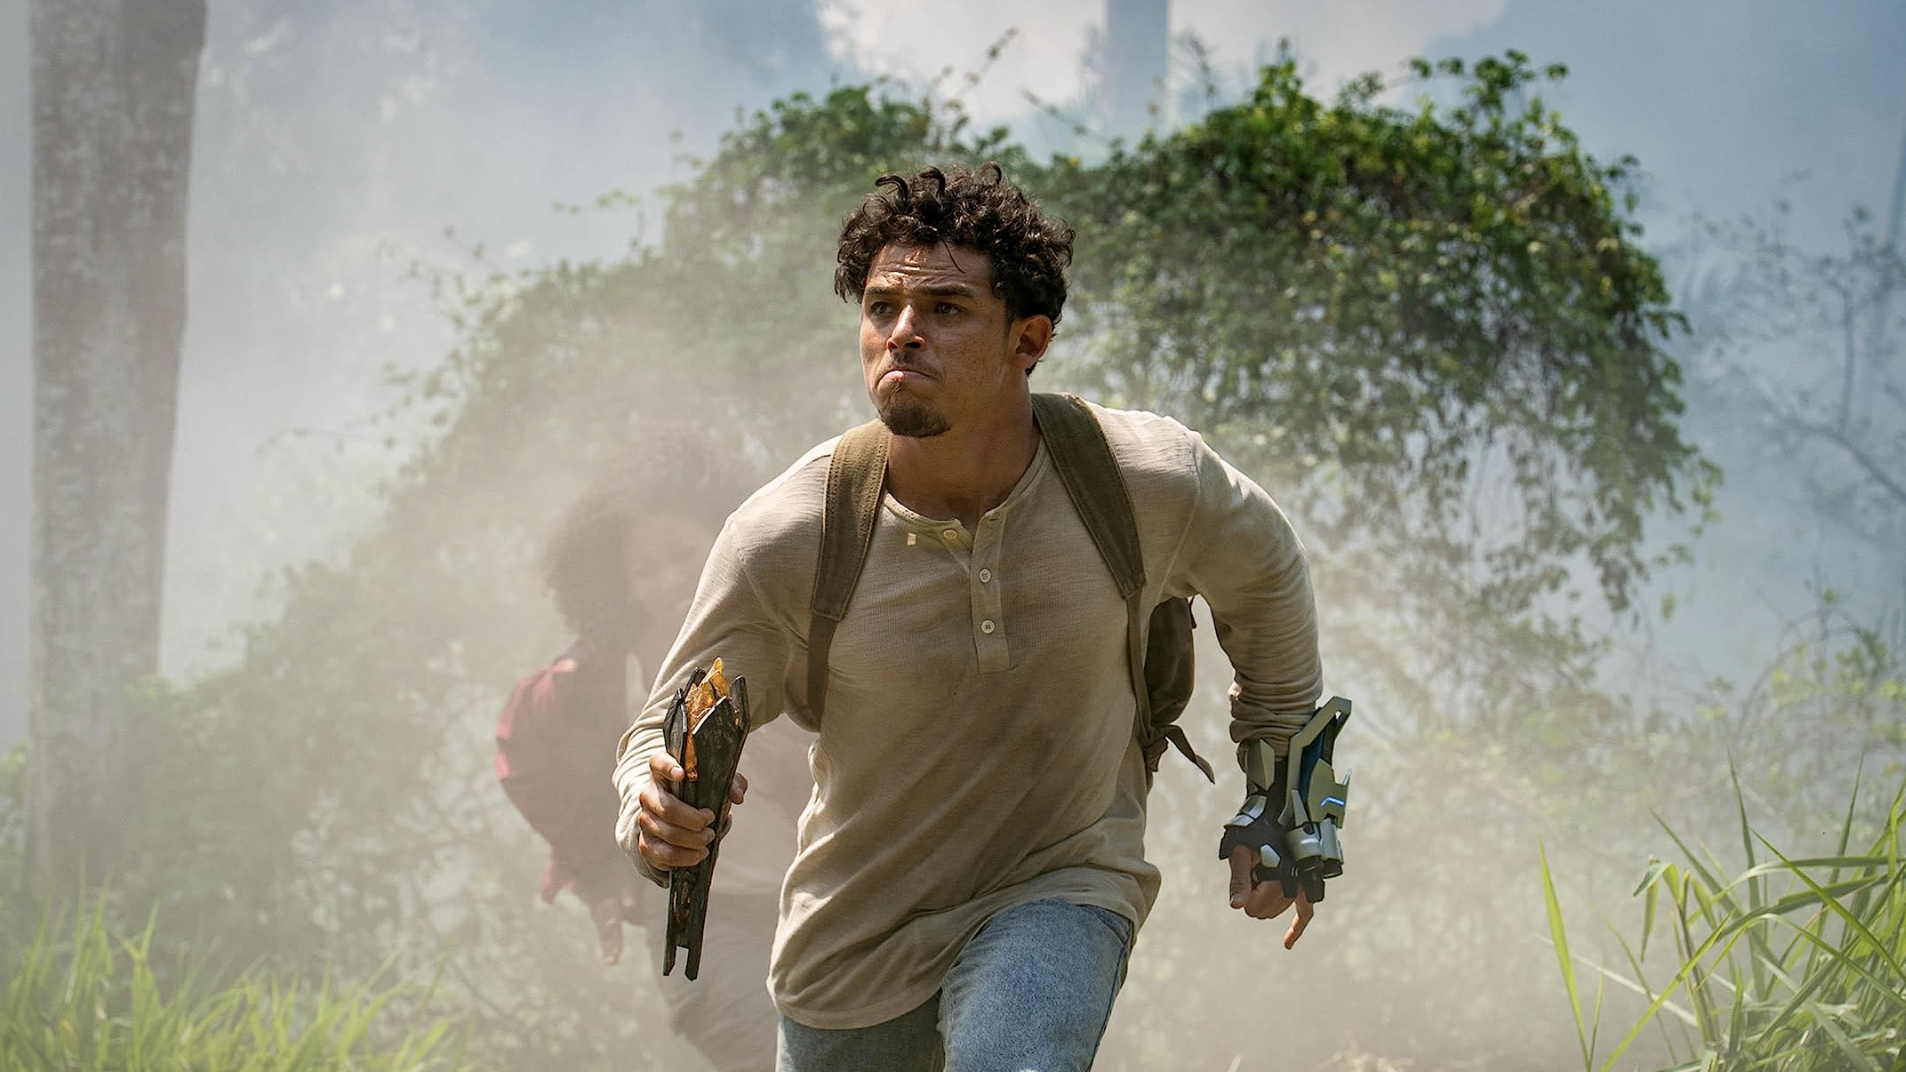 The Lost City'  Prime Video Streaming Review: Stream It or Skip It?